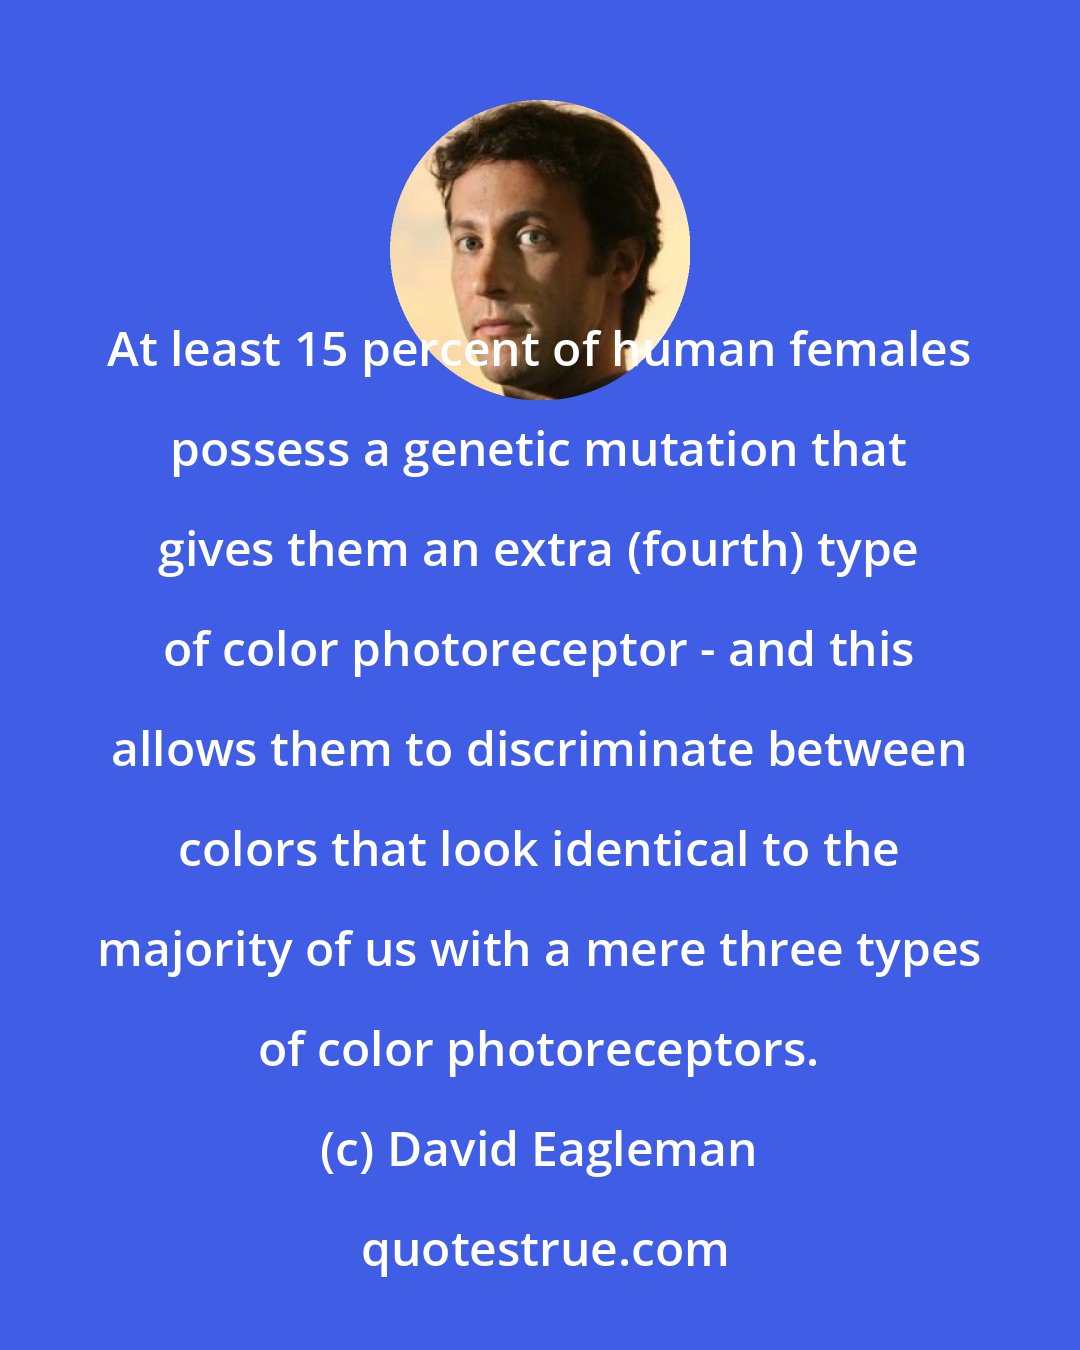 David Eagleman: At least 15 percent of human females possess a genetic mutation that gives them an extra (fourth) type of color photoreceptor - and this allows them to discriminate between colors that look identical to the majority of us with a mere three types of color photoreceptors.